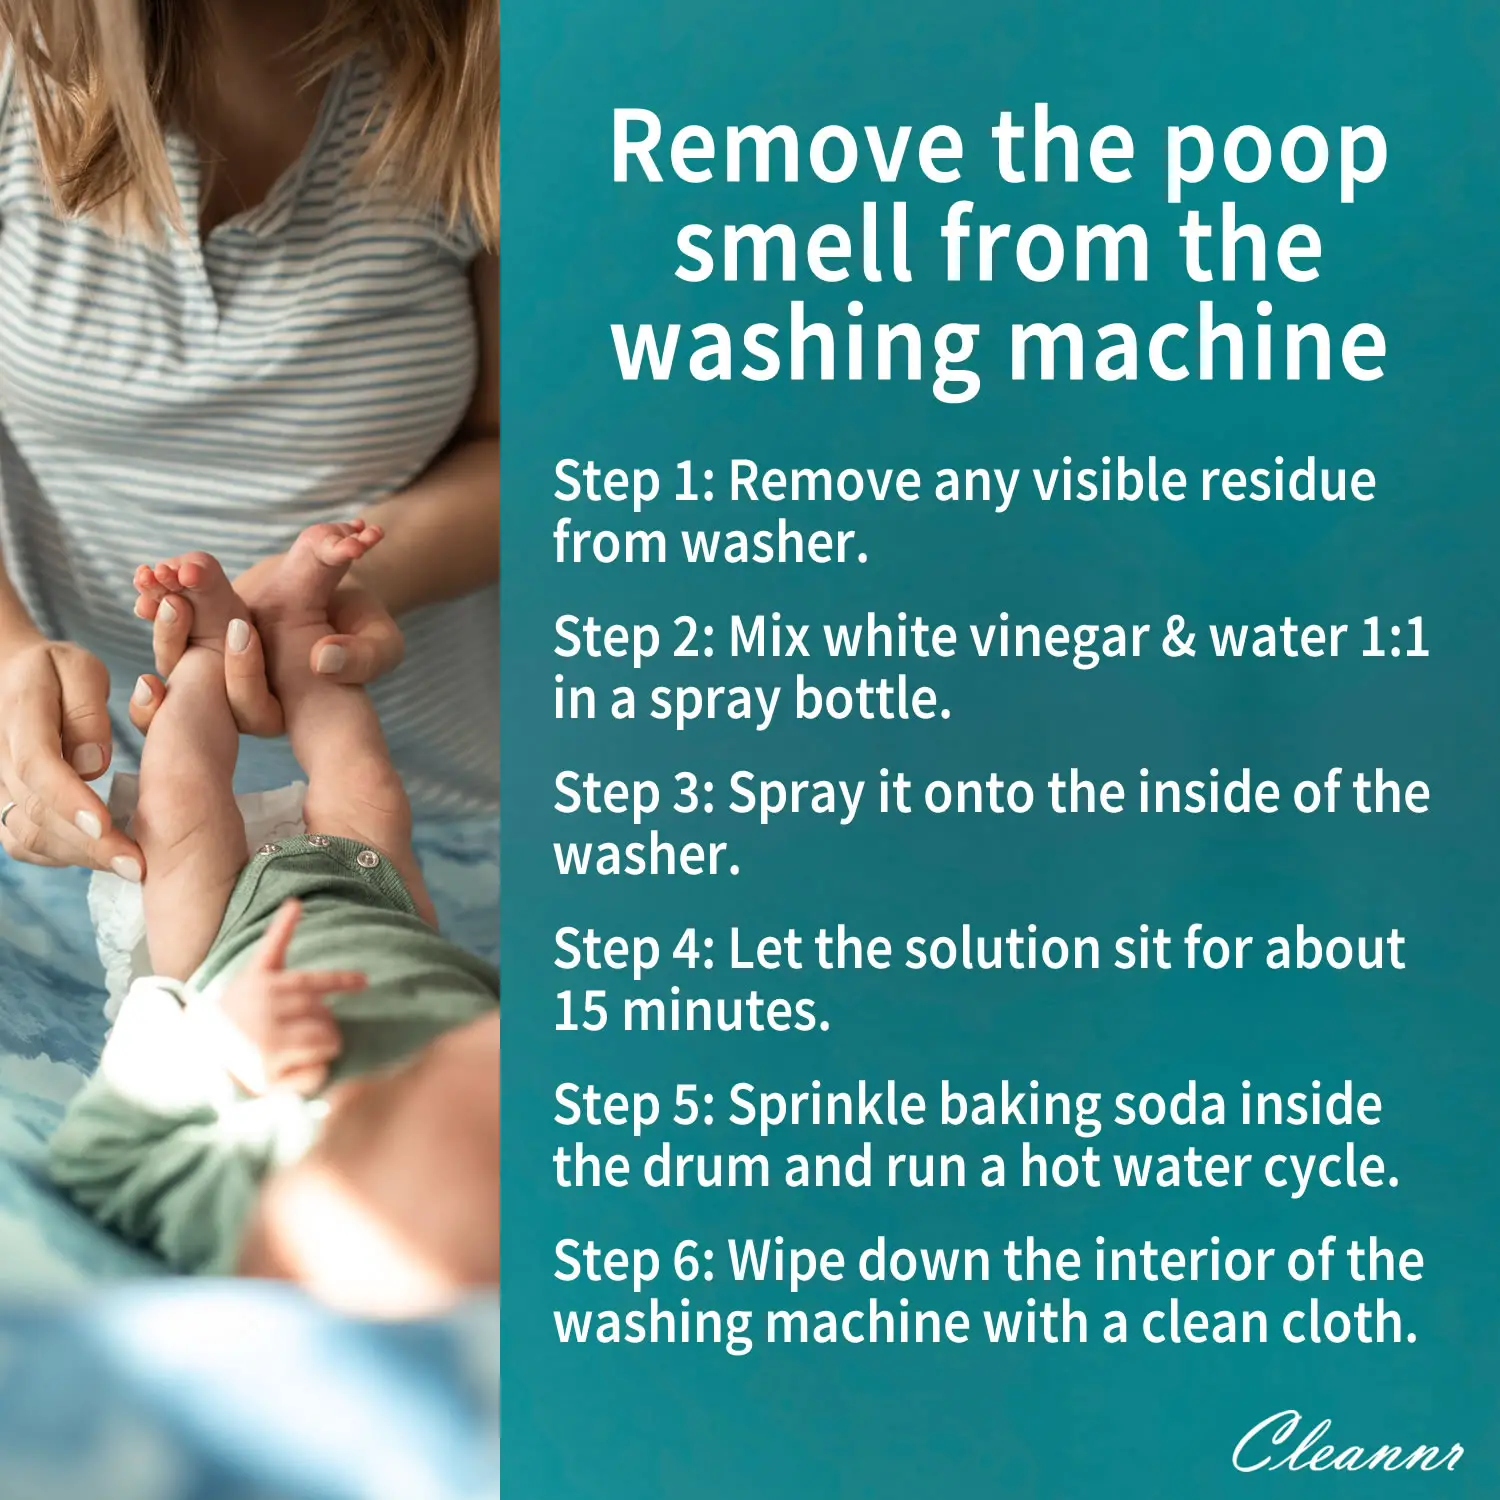 How to get the poop smell out of the washing machine